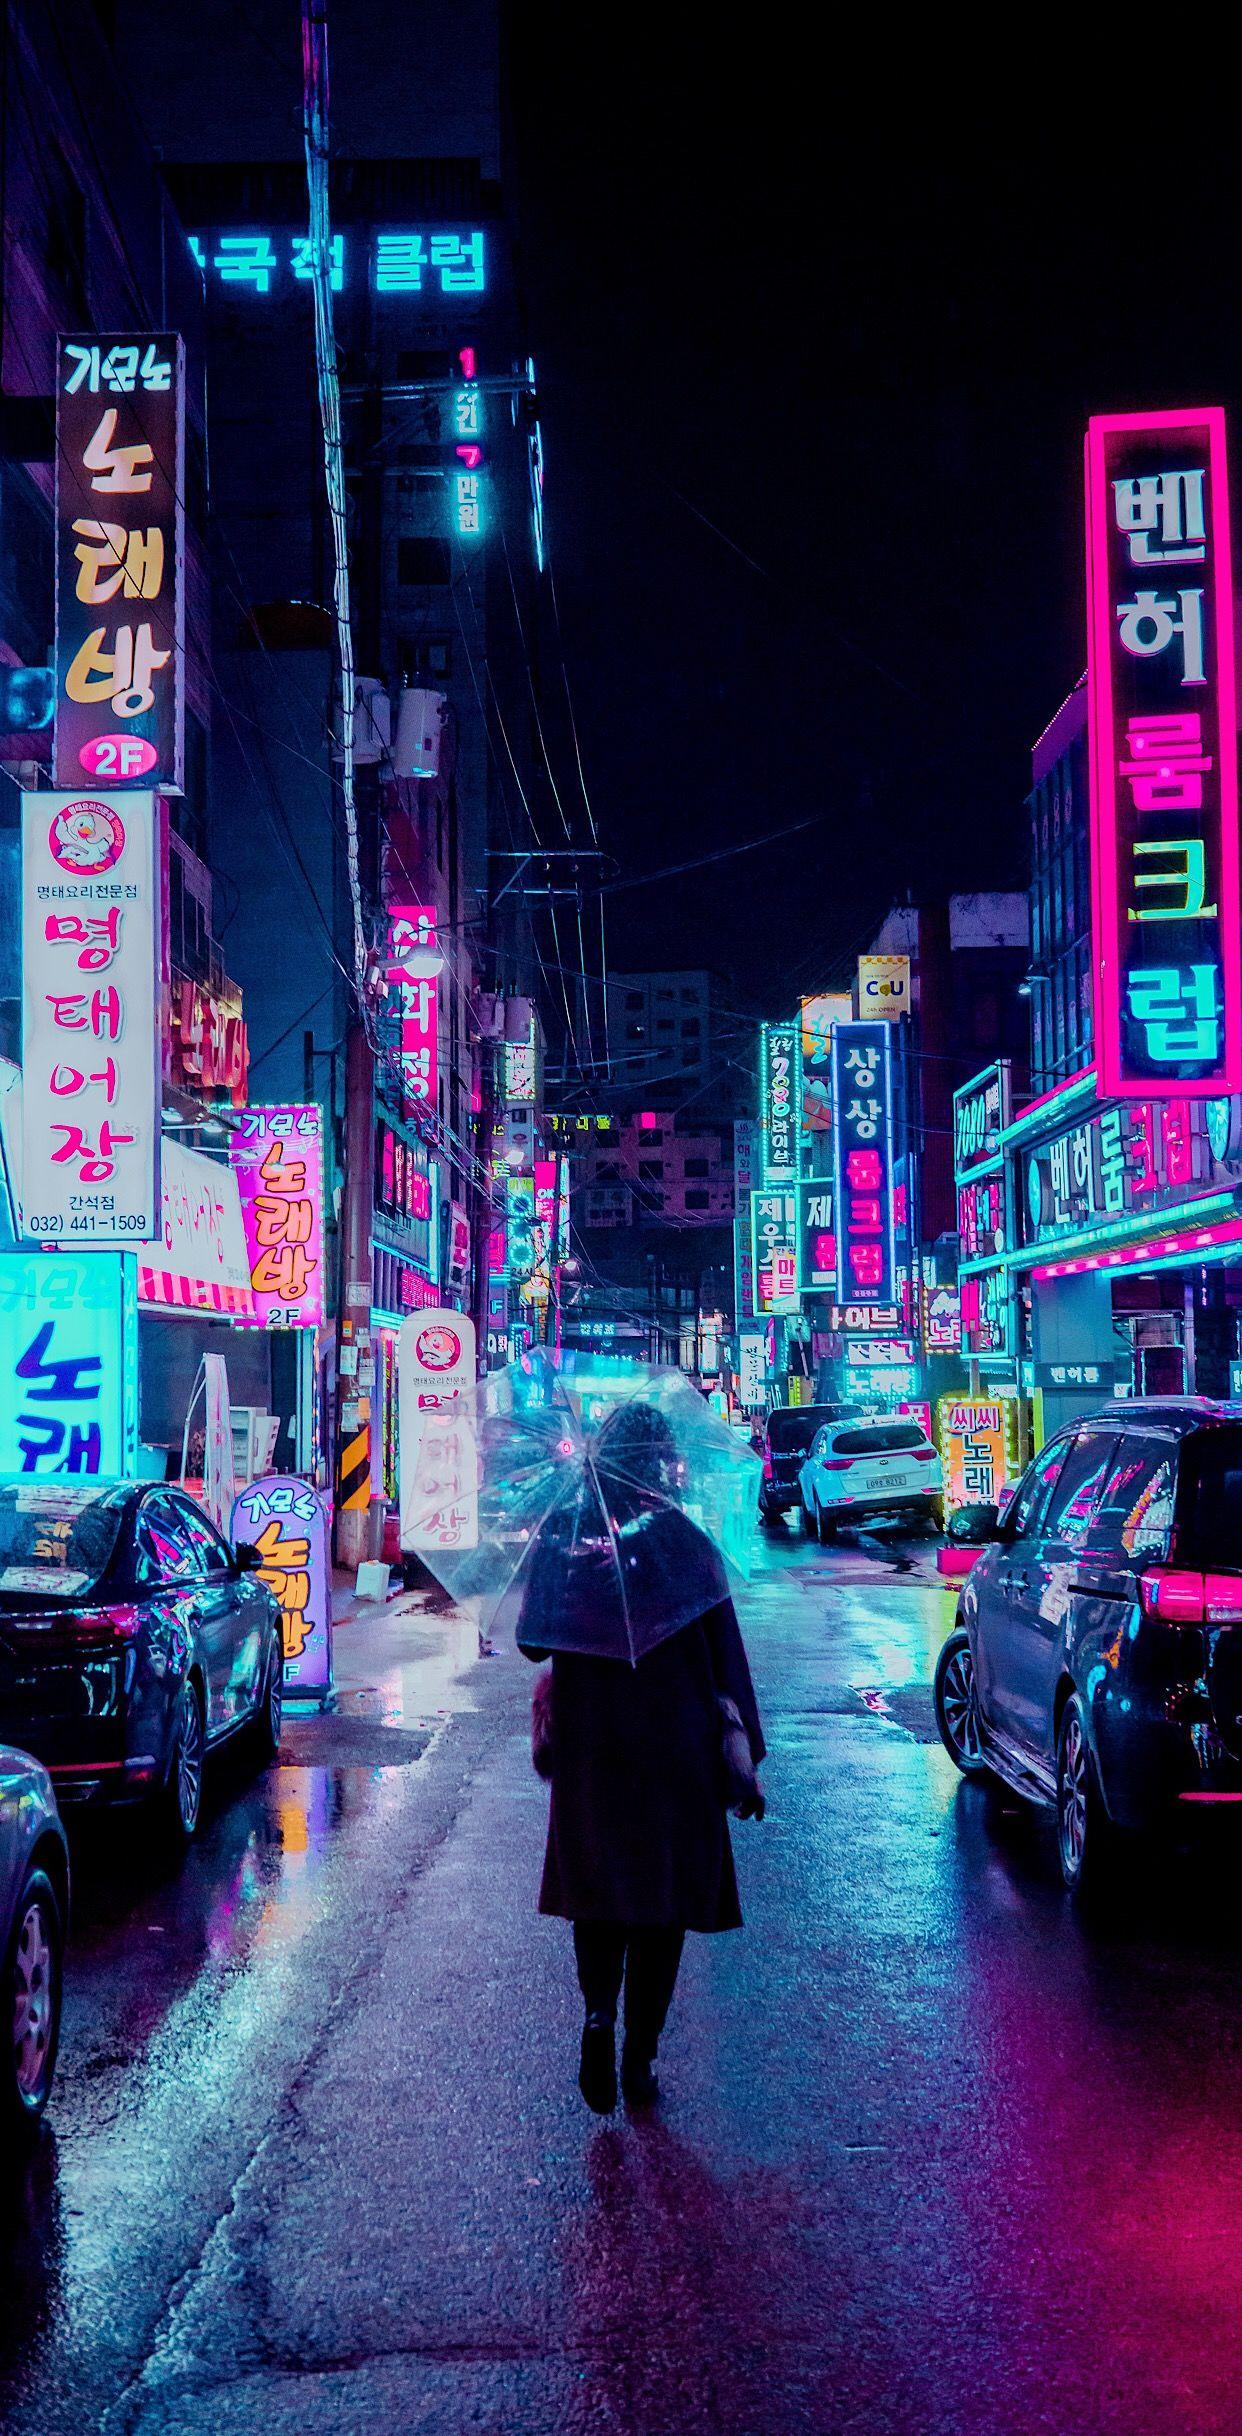 Collection of Cyberpunk / Neon Phone Wallpapers